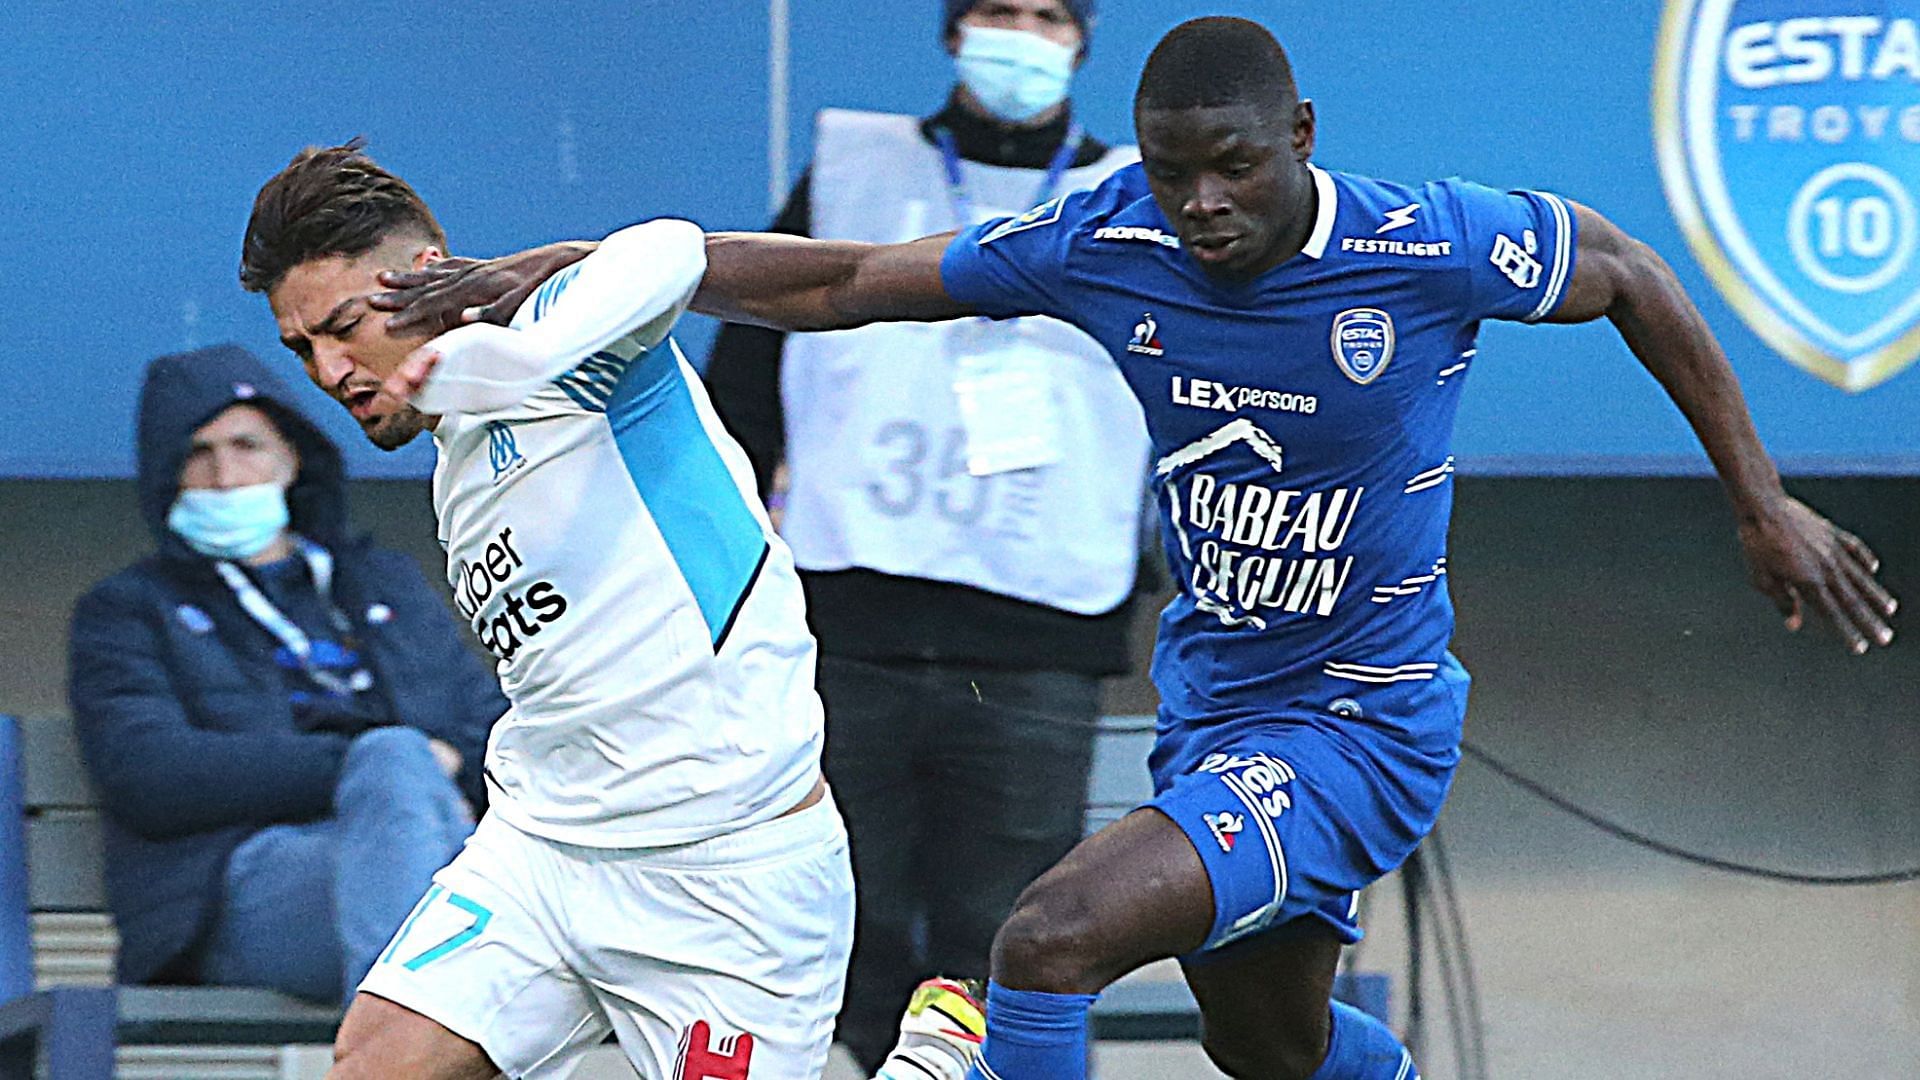 Troyes will take on in-form Marseille in Ligue 1 on Wednesday